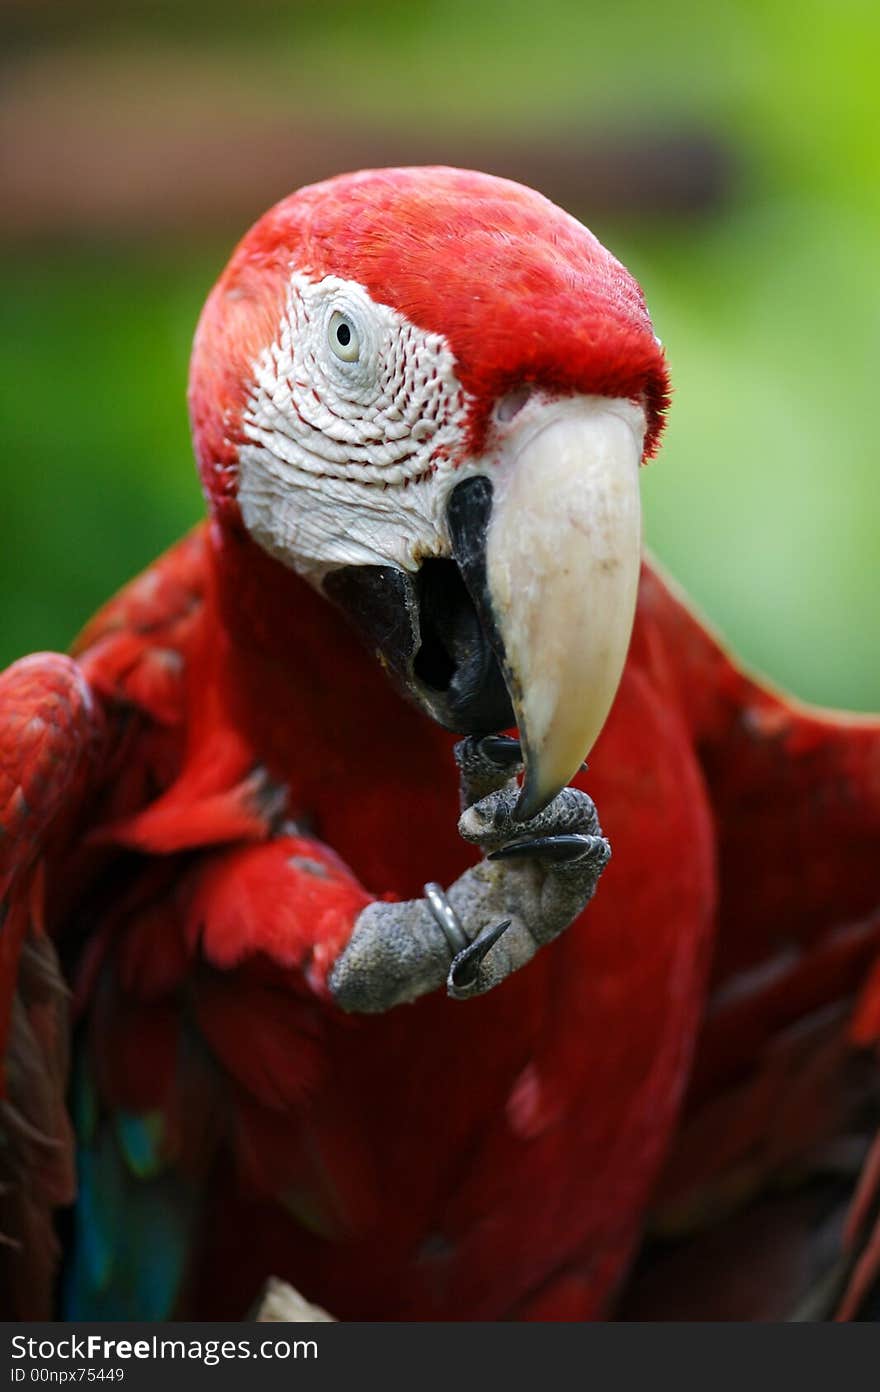 A close up shot of a Scarlet Macaw Macaw